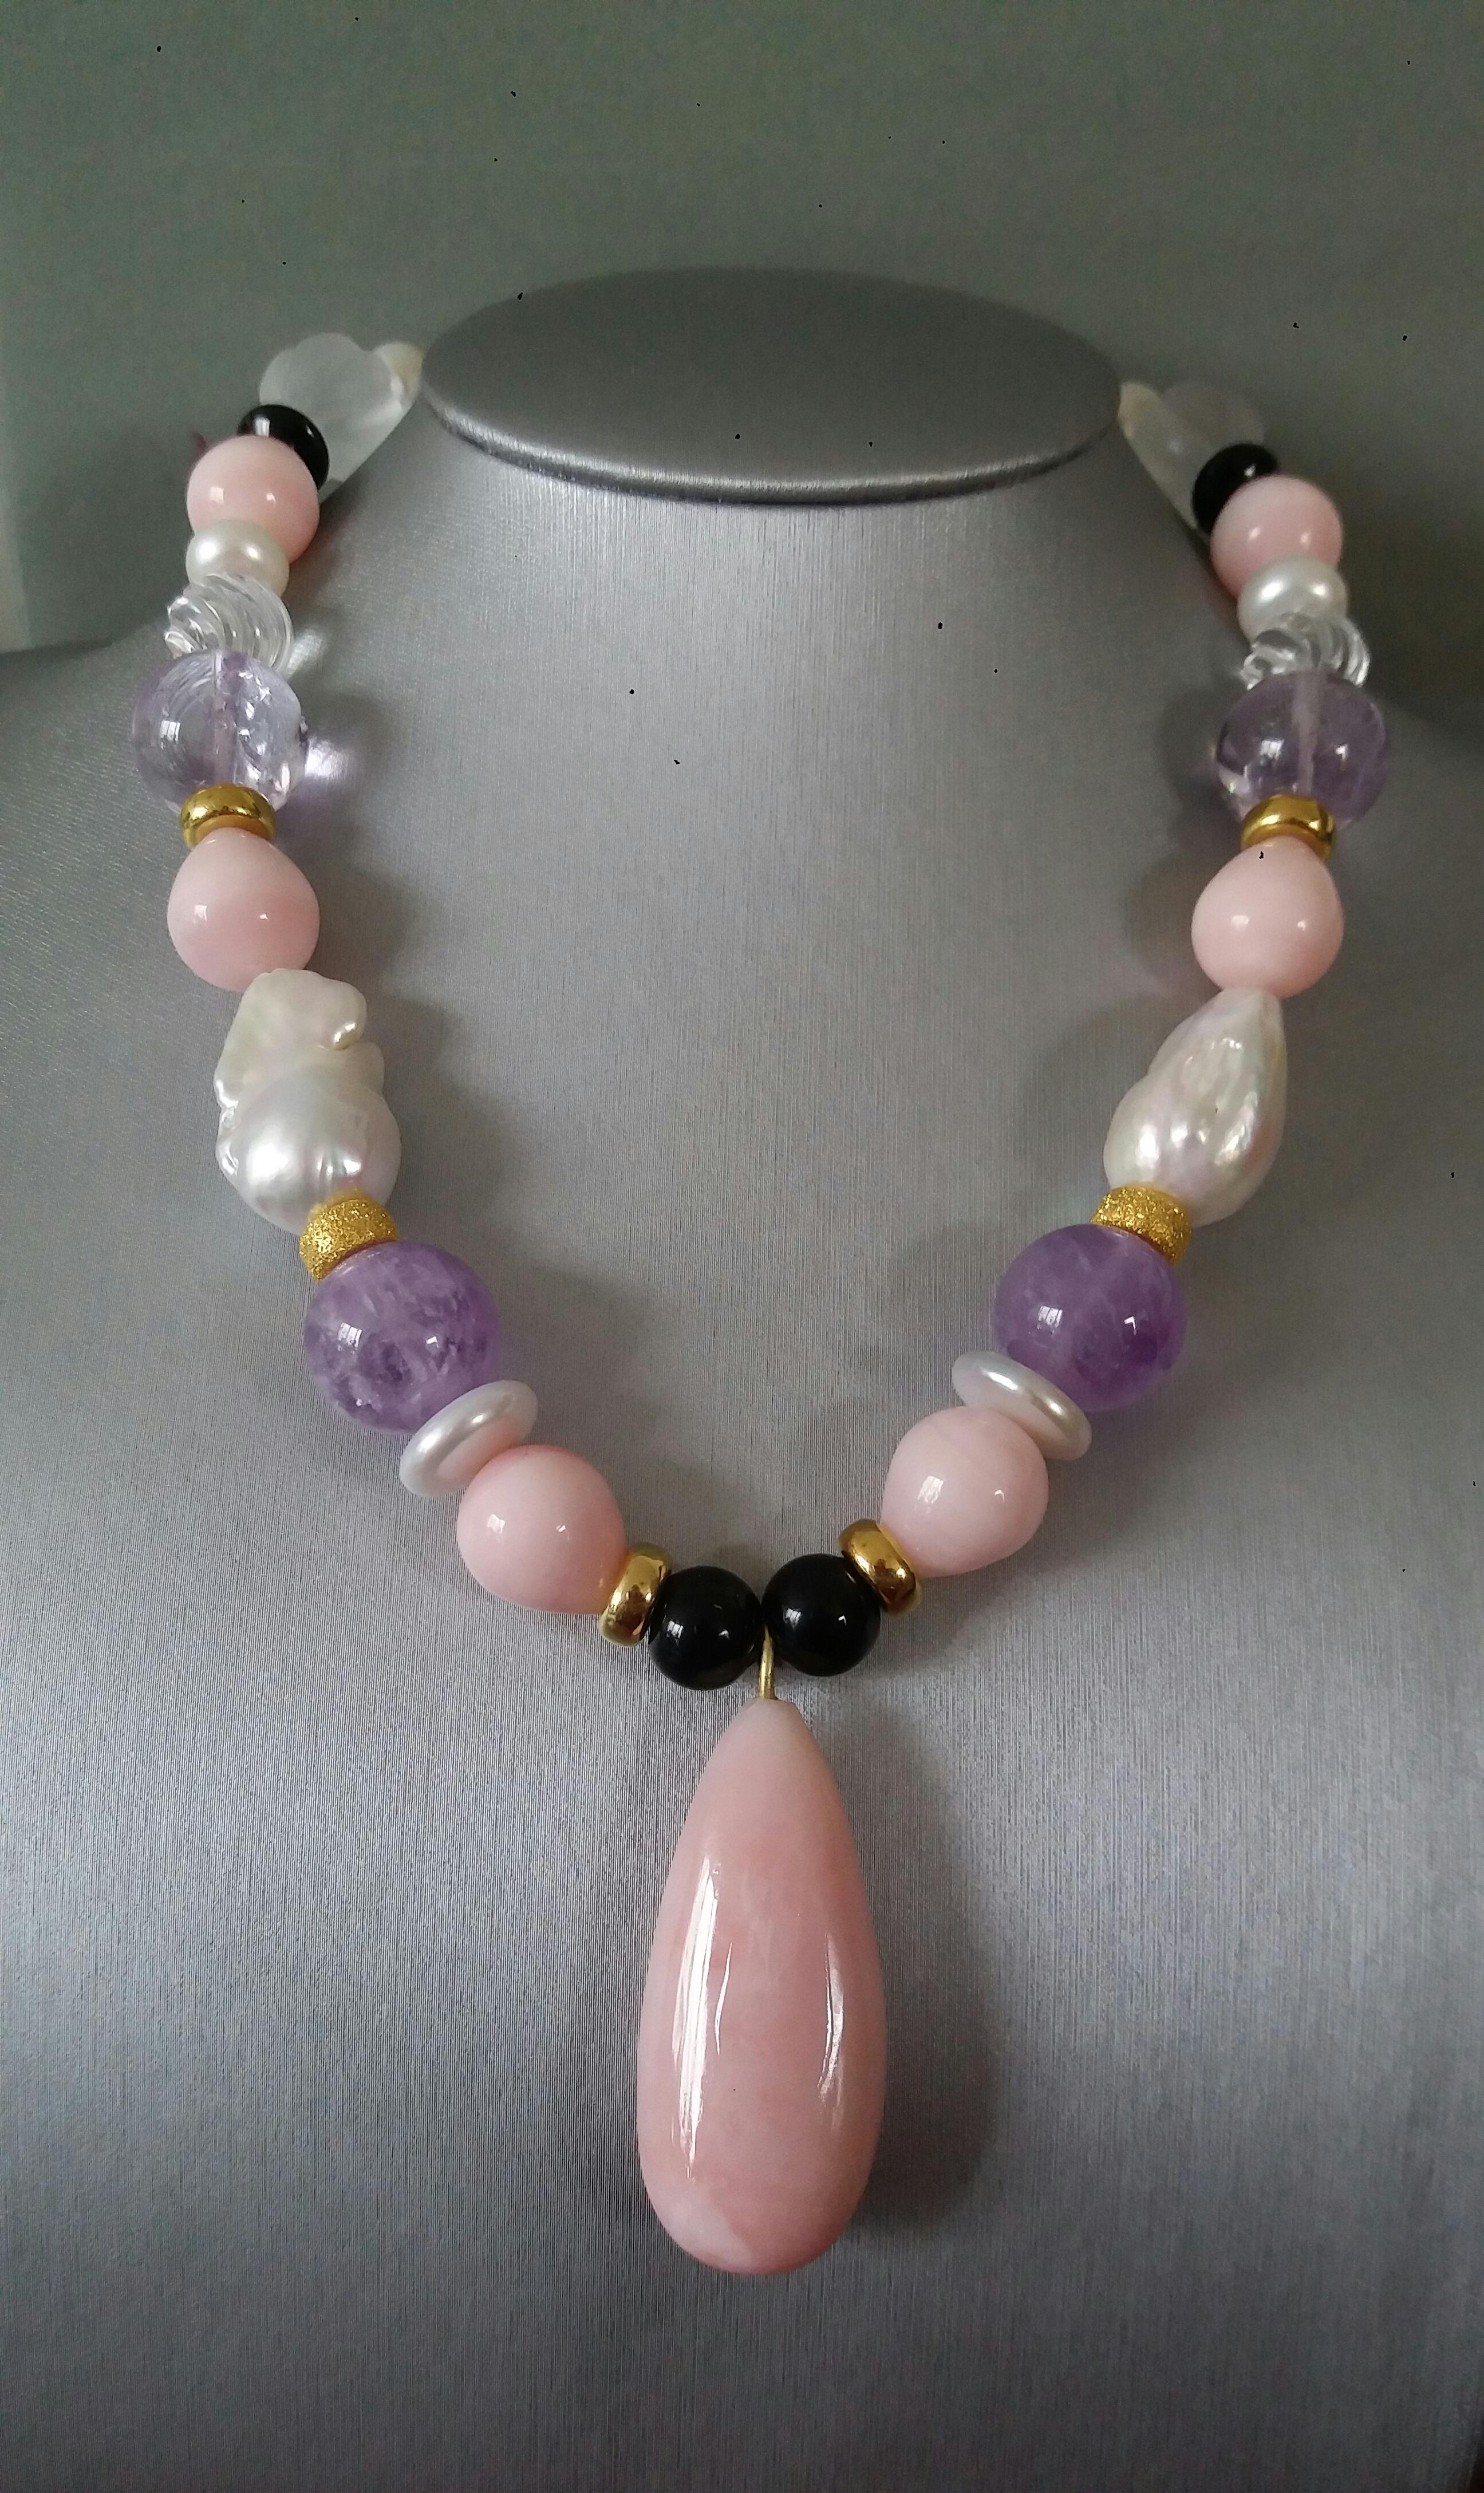 Unique and classy Necklace composed of big size Baroque Pearls, Round Drop Shape Pink Opal,Amethyst spheres of 16 mm, Engraved Quartz beads , Black Onyx 16 mm beads, 14 kt Yellow Gold elements, from which hangs a plain Pink Opal  Pendant  measuring